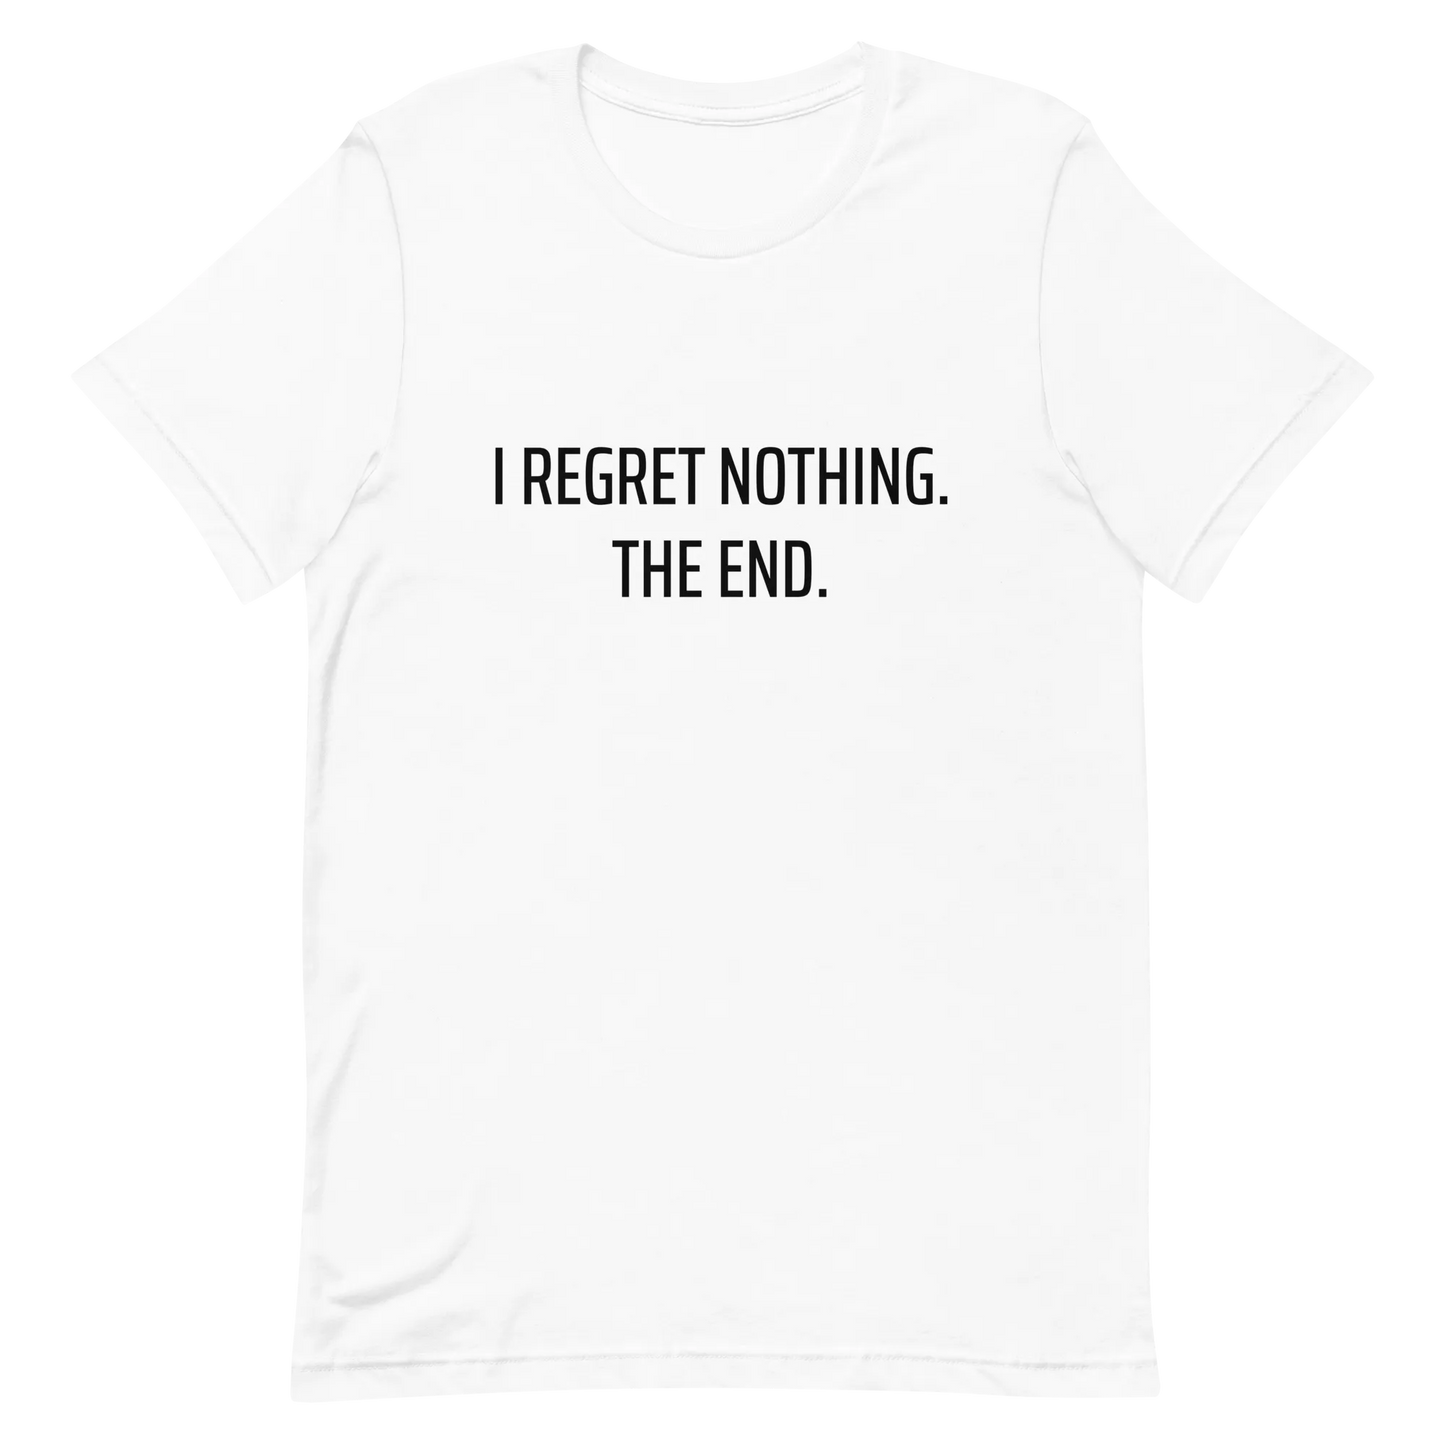 I Regret Nothing Tee in White flatlay